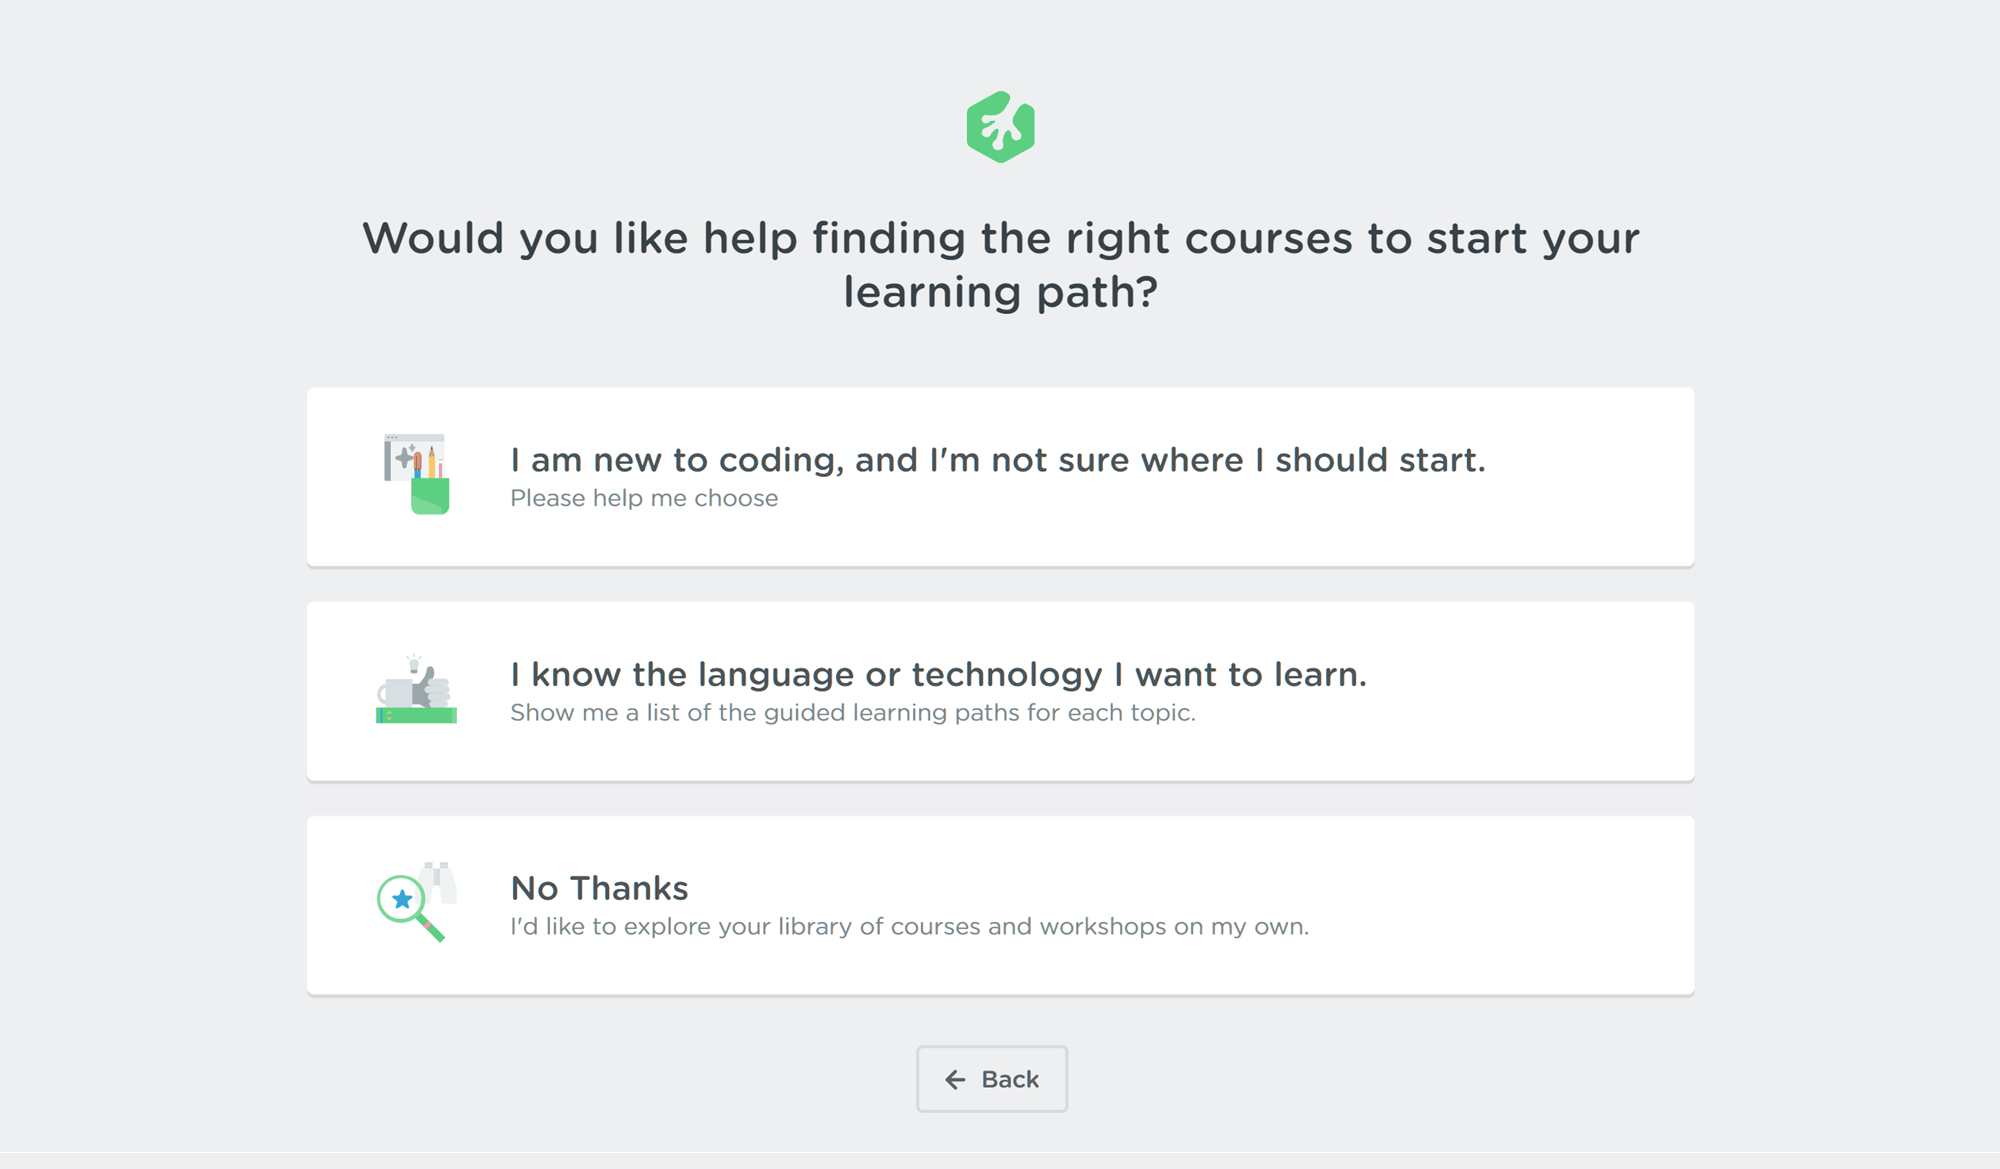 More Treehouse Survey Questions